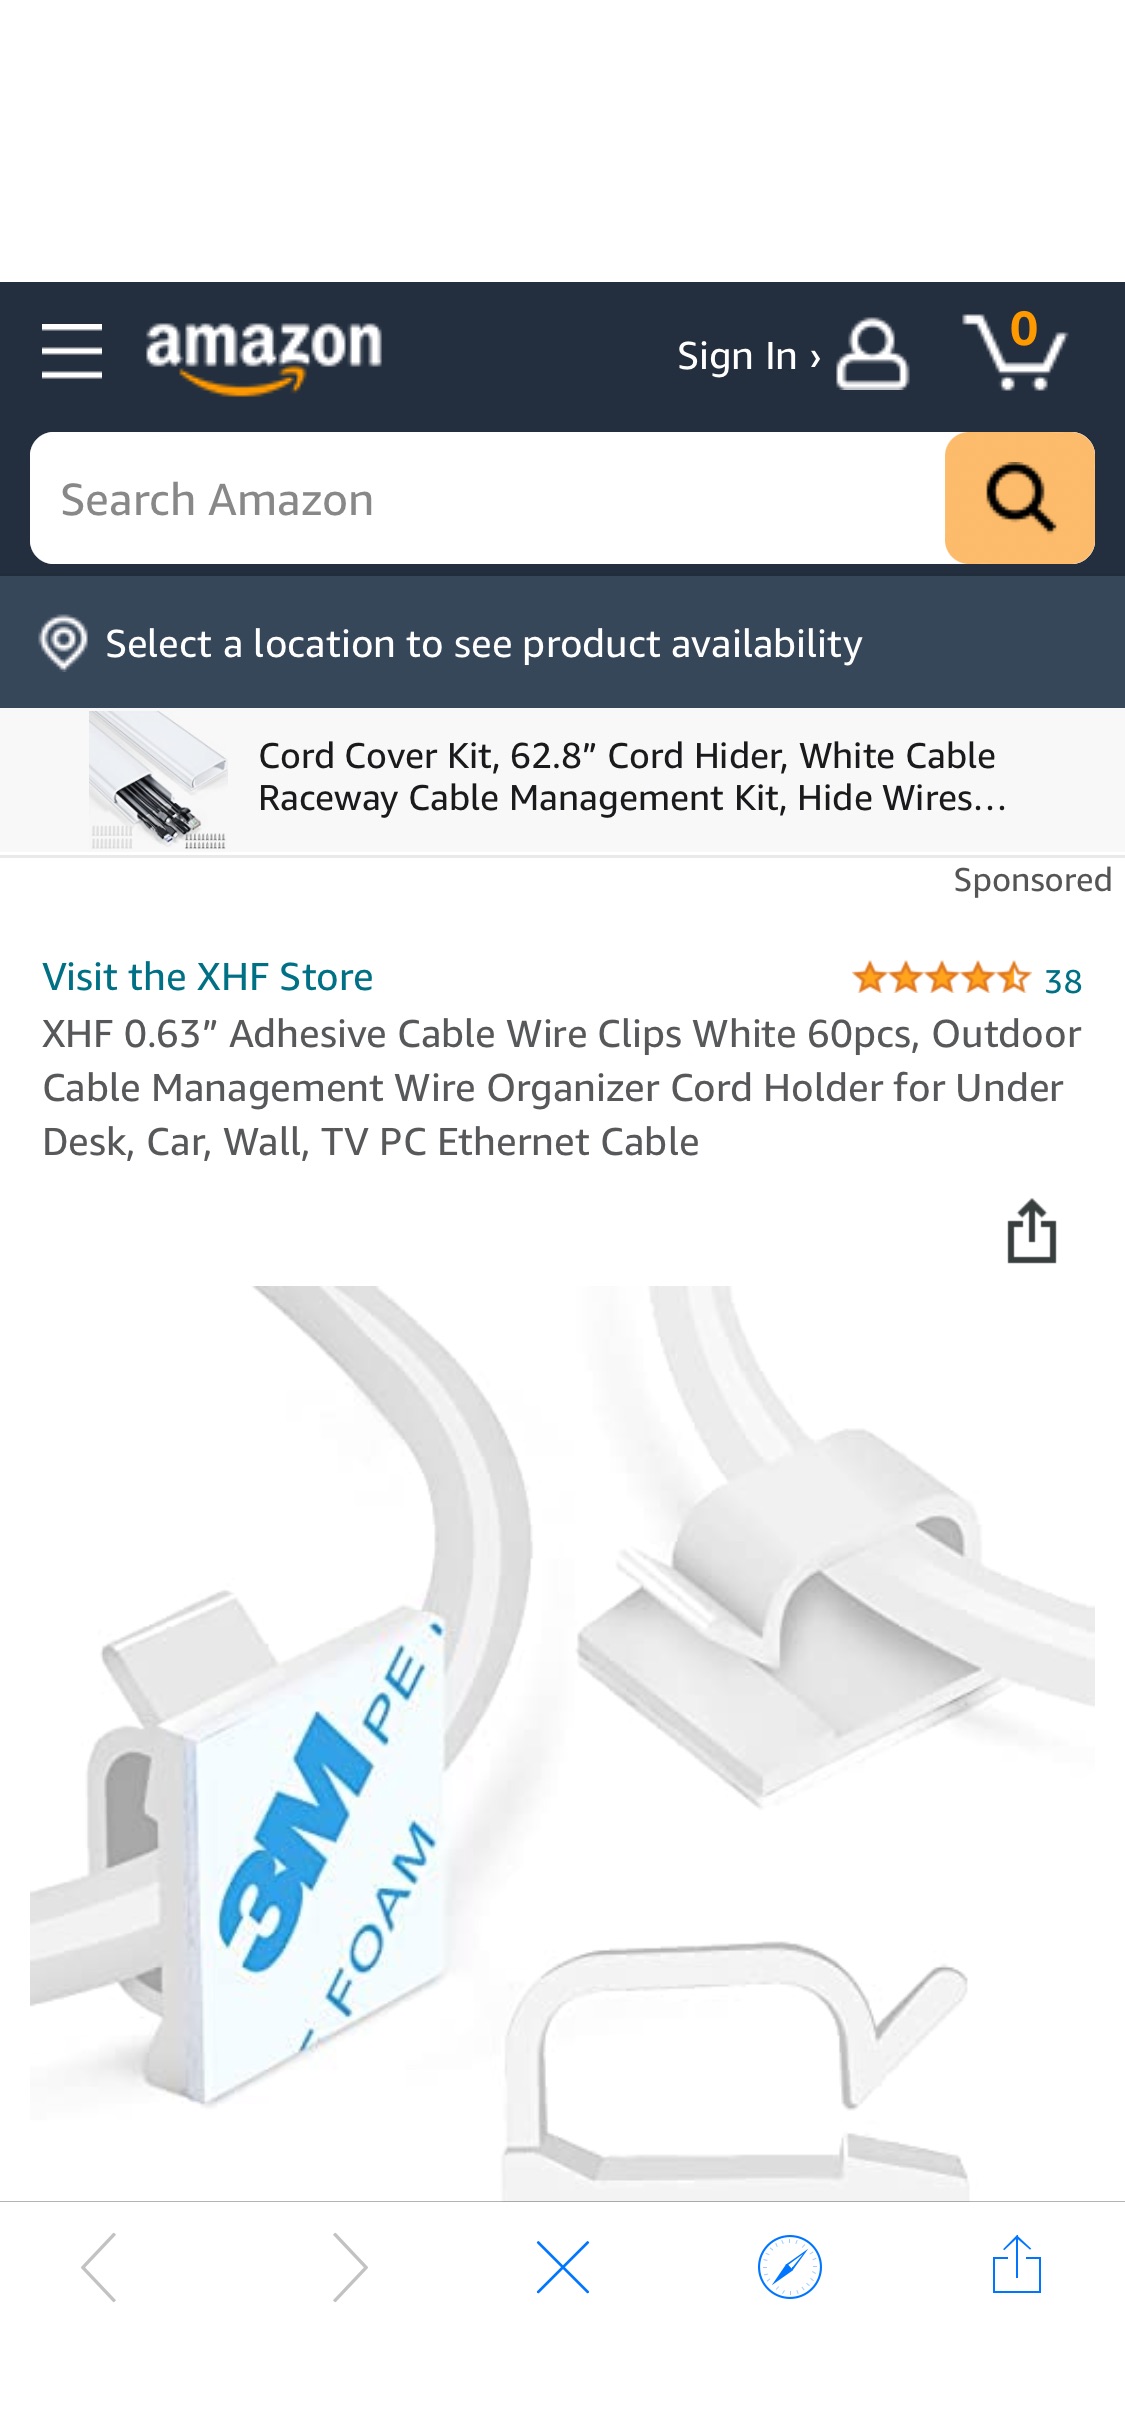 Amazon.com: XHF 0.63” Adhesive Cable Wire Clips White 60pcs, Outdoor Cable Management Wire Organizer Cord Holder for Under Desk, Car, Wall, TV PC Ethernet Cable : Electronics